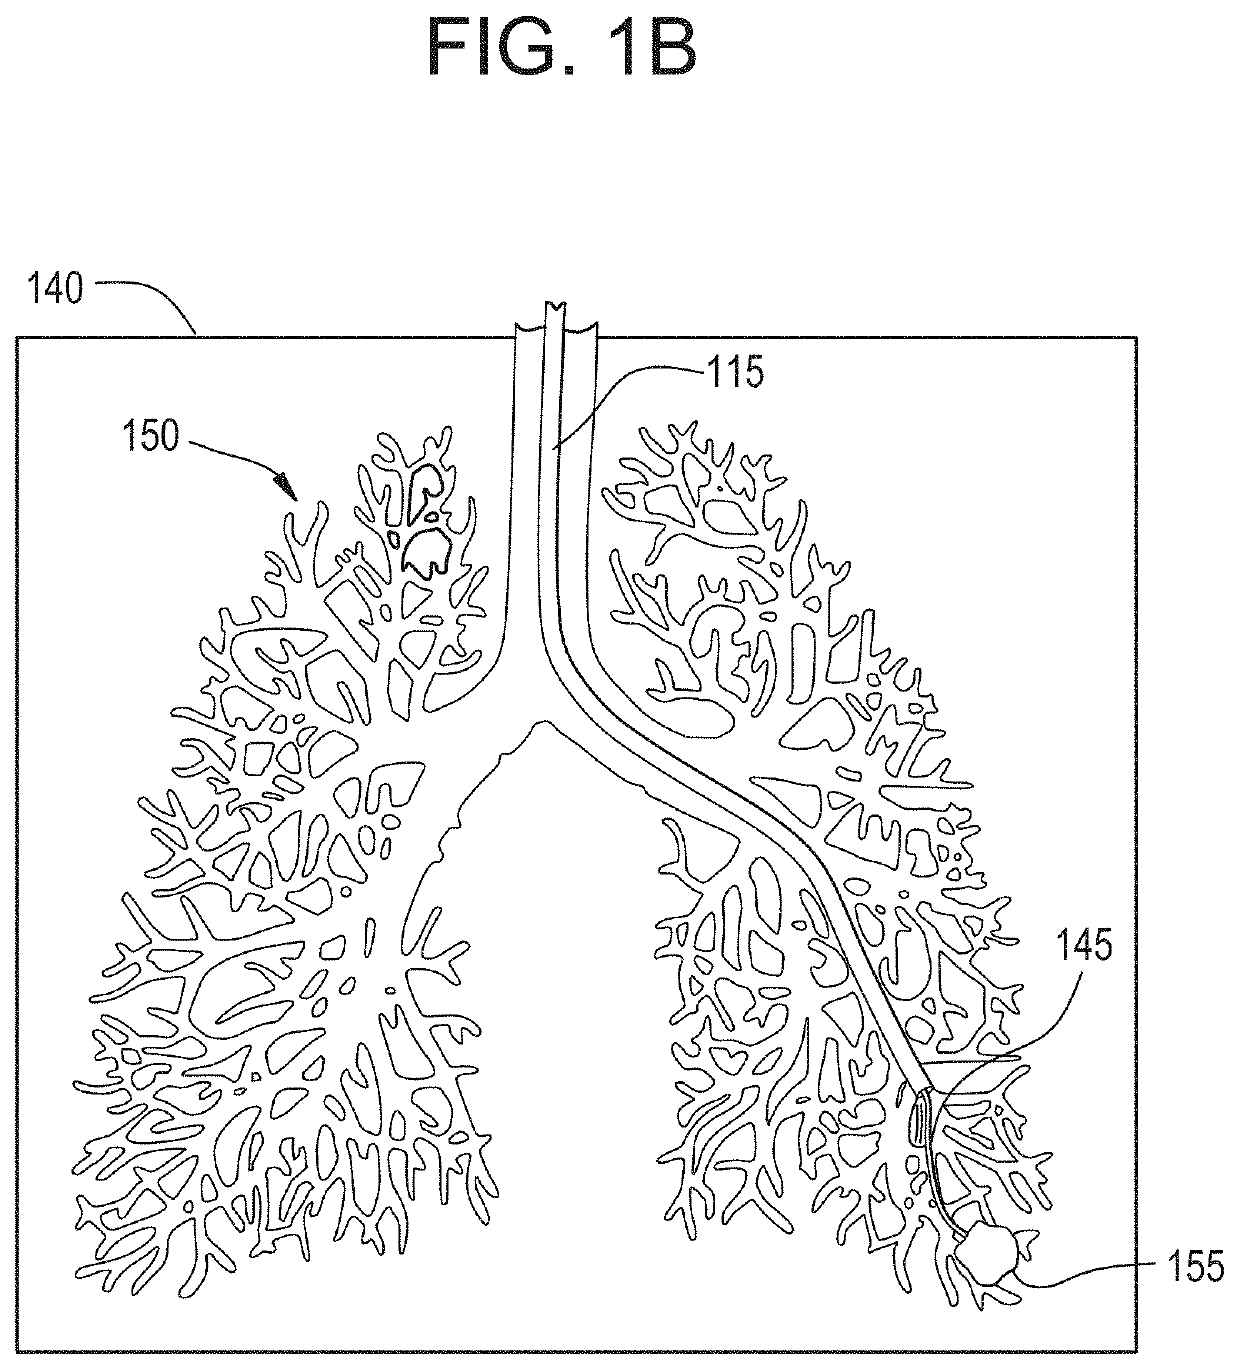 Systems and methods for  liquid flooding of lung to enhance endobronchial energy transfer for use in imaging, diagnosis and/or treatment